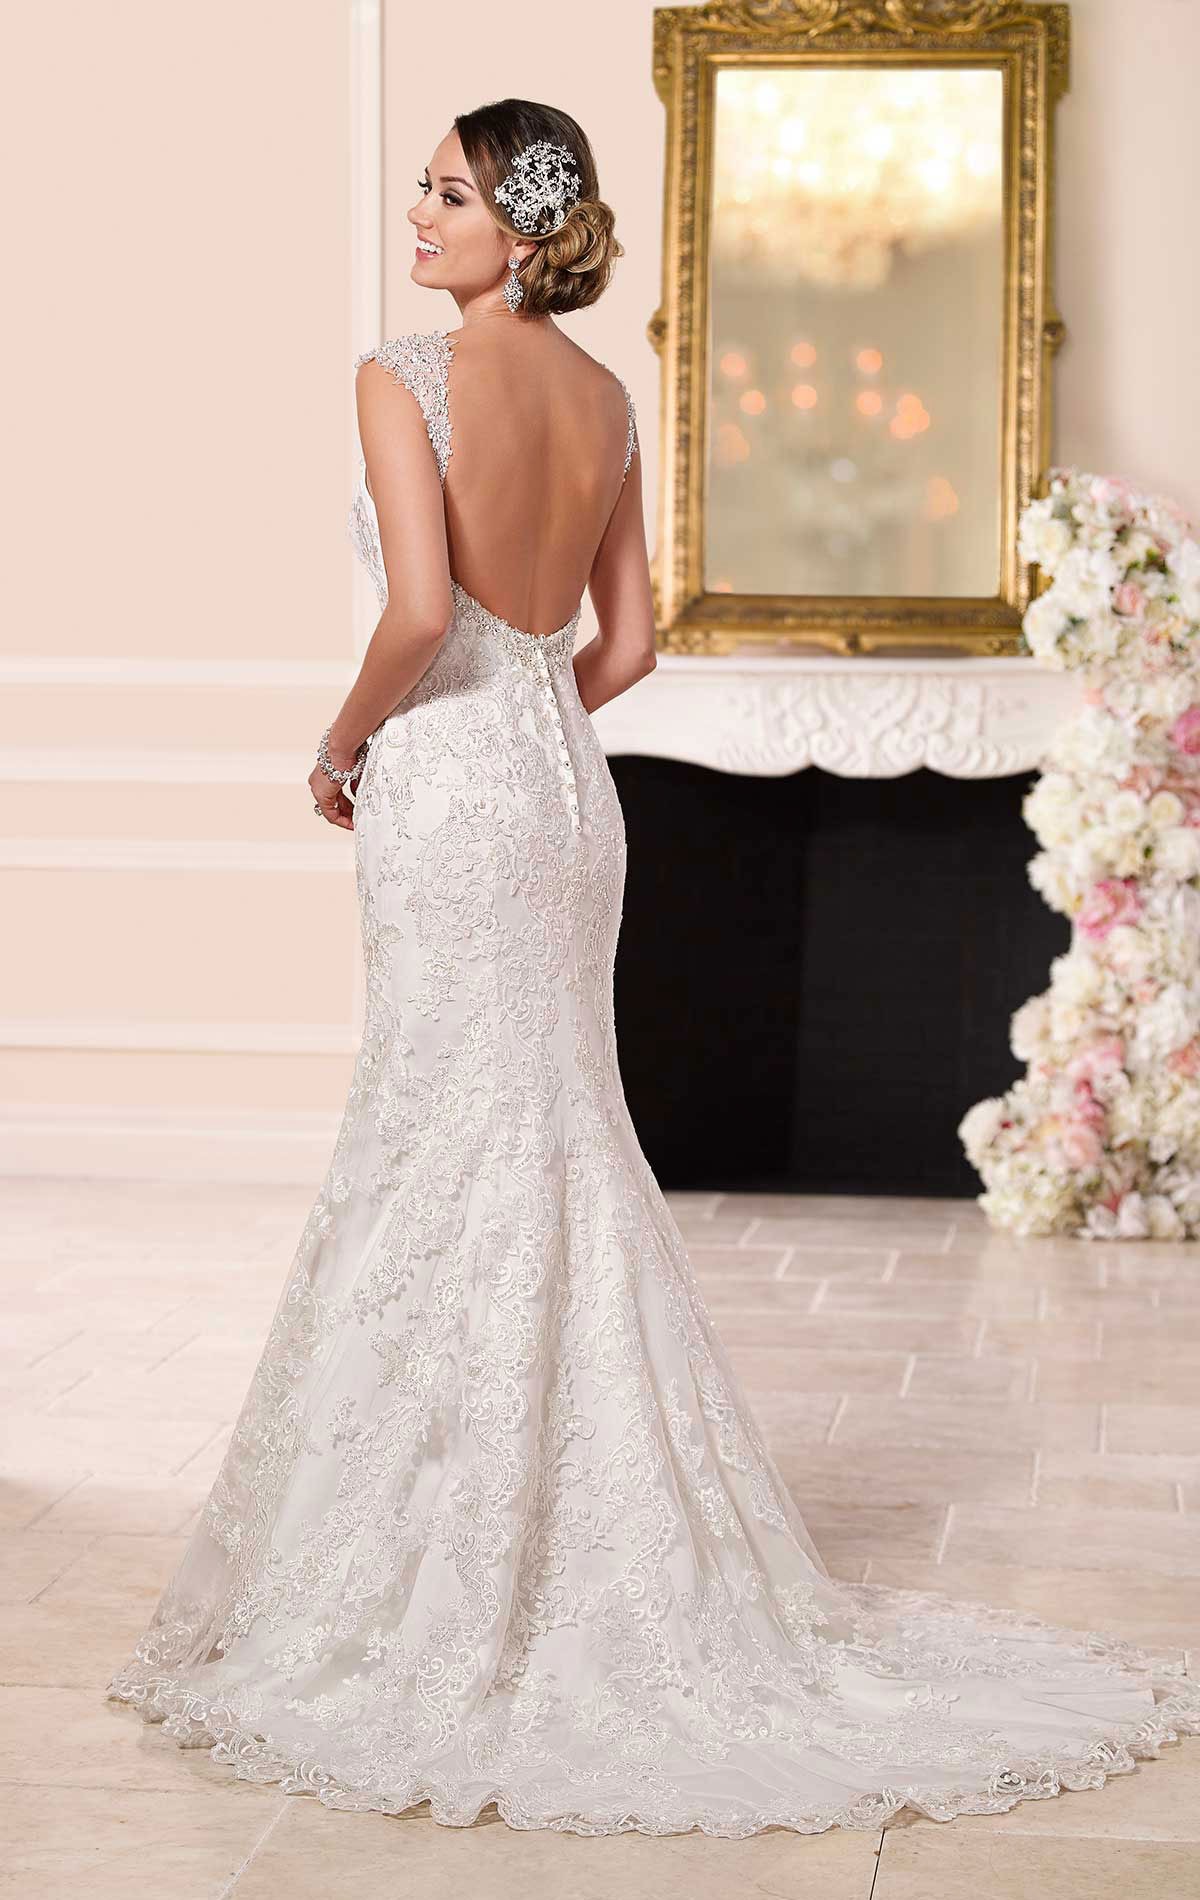 Isadora - Size 6 - Stella York 6105 1920's look fit and flare beaded lace wedding dress with crystal & diamanté beaded sweetheart neckline & beaded cap sleeve shoulder strap & low back. Sample Dress Now Reduced at Blessings of Brighton Wedding Dress Sample Sale, BN1 5GG. Telephone: 01273 505766. Stella York 6025 Blush Pink slim A-line wedding dress with Tulle skirt and fitted Lace strapless bodice at Blessings of Brighton, BN1 5GG. Telephone: 01273 505766. Situated off the A23/A27 in outer Brighton,  Free Easy Parking.